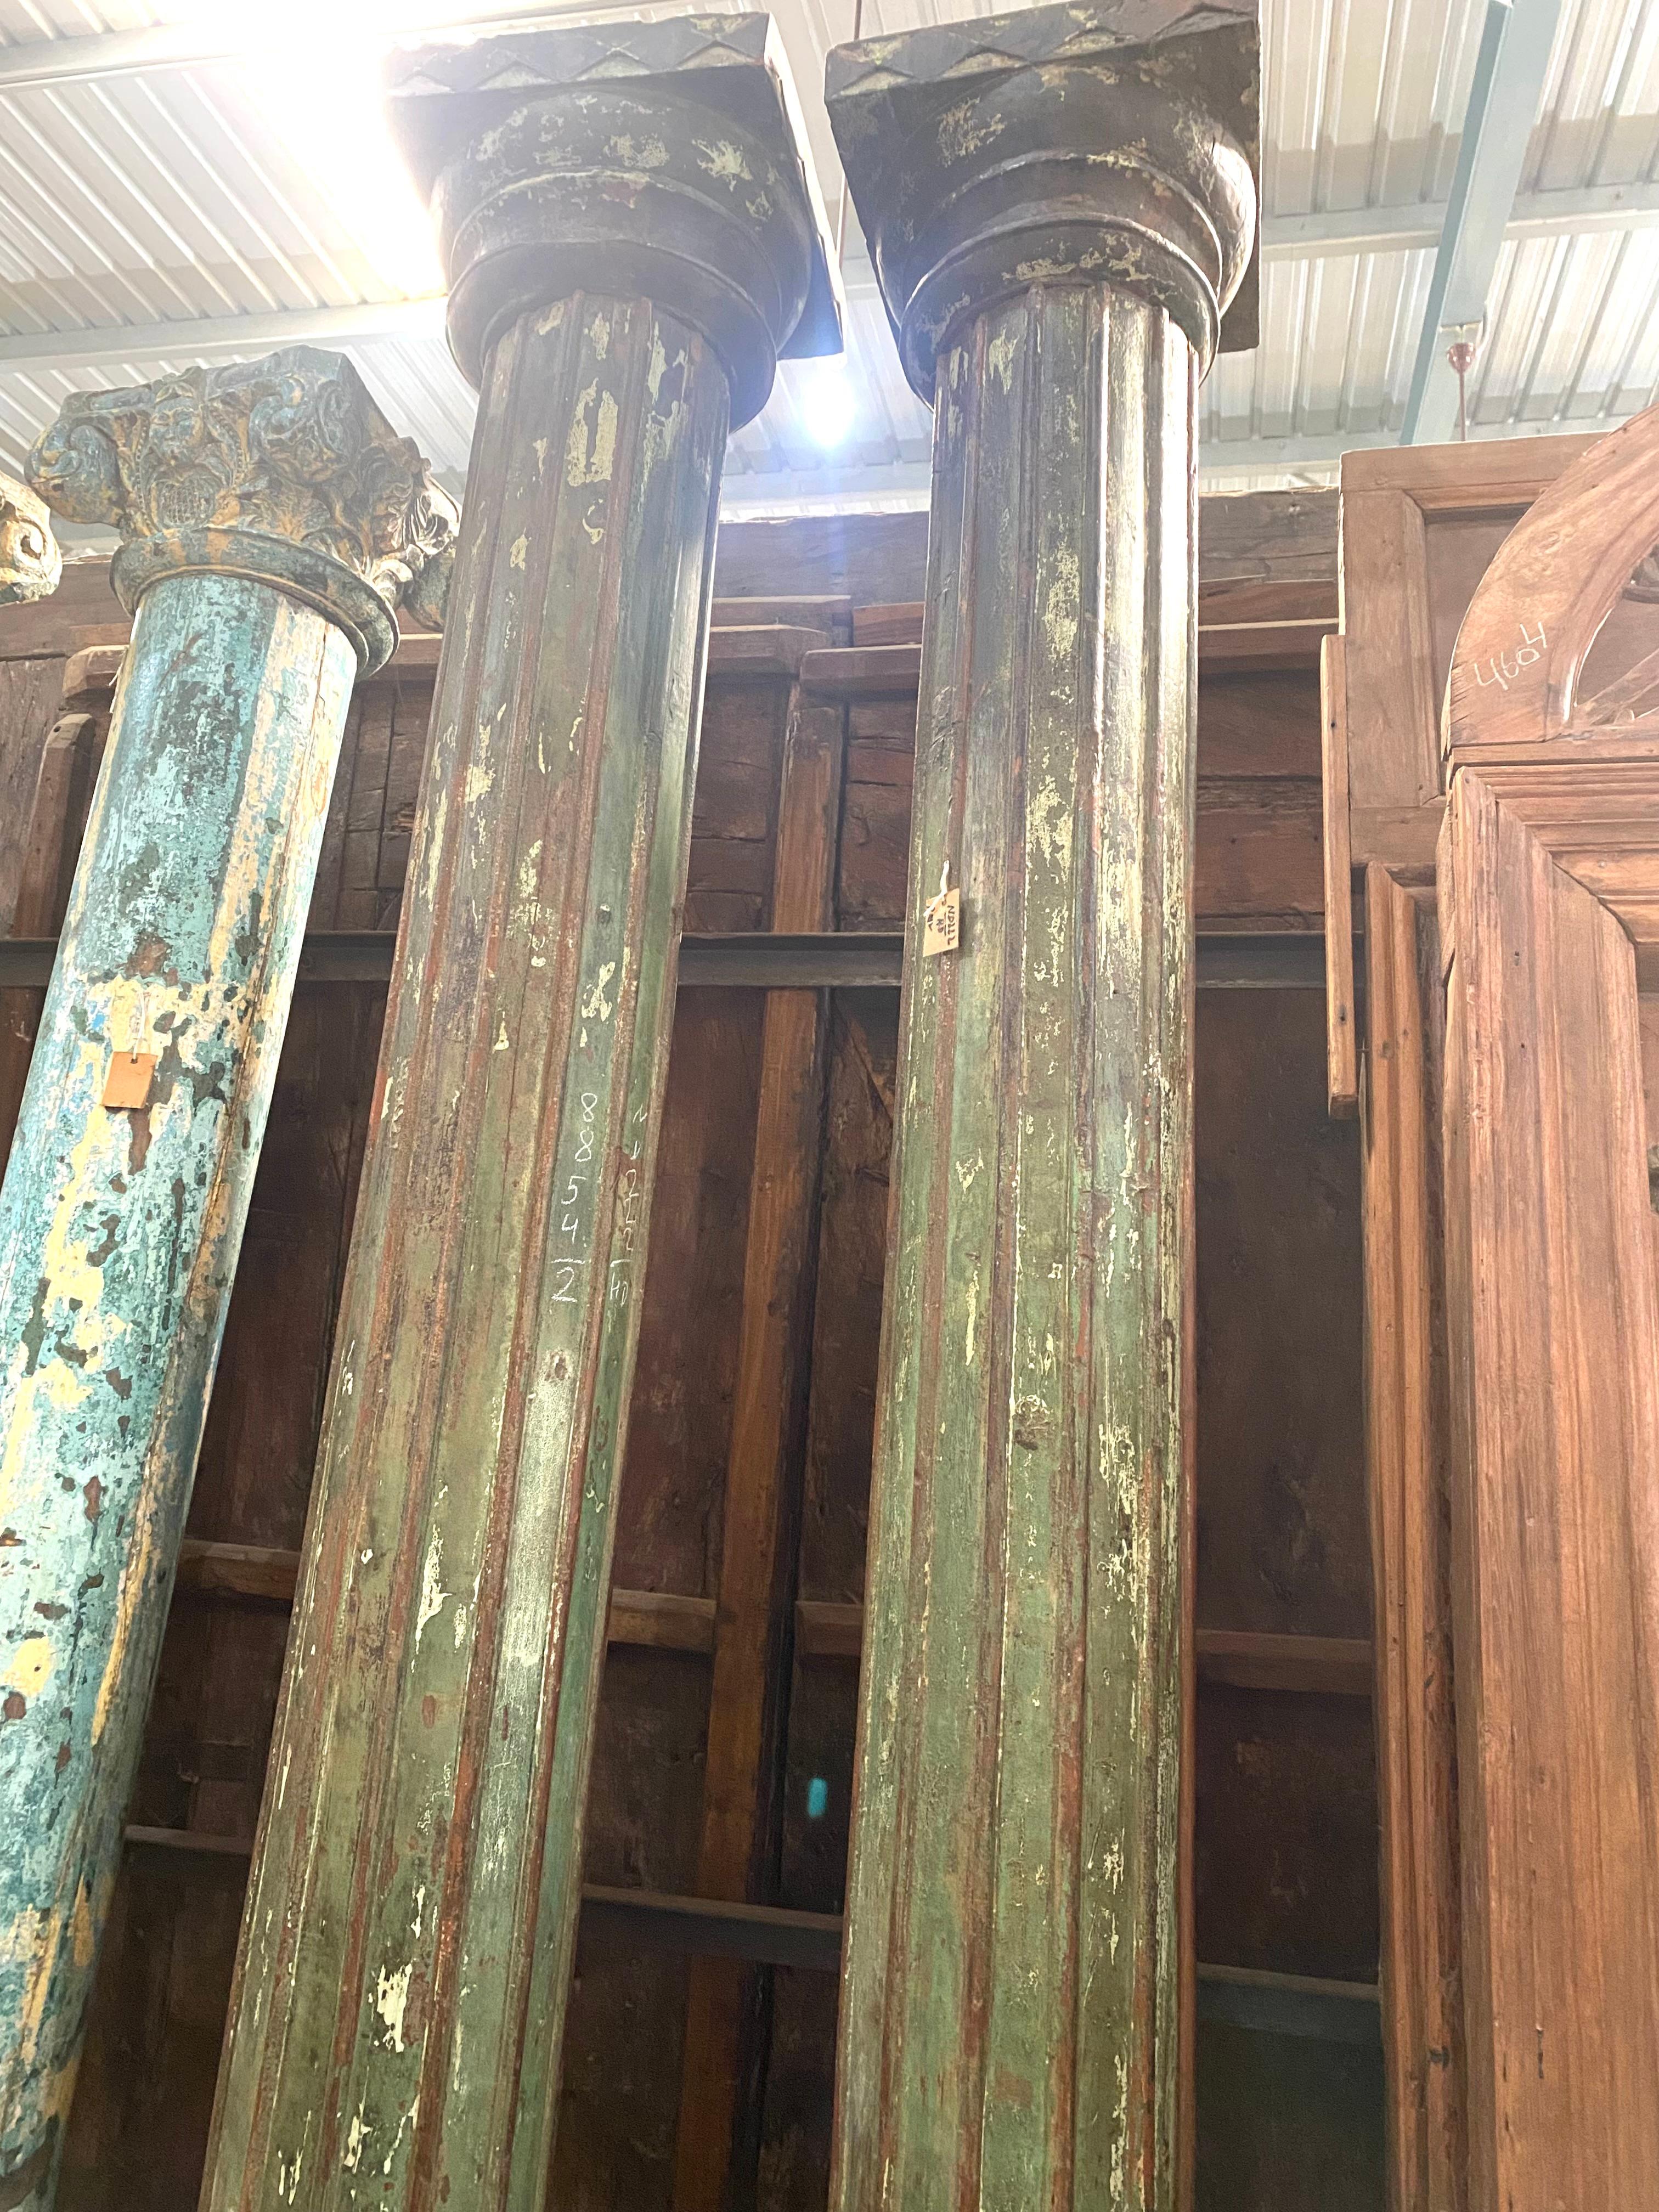 This extraordinary pair of 2 columns is made of teak wood with nice vintage patina. The capitals and stone basis feature scarved geometrical paterns.
Each column is composed of 3 parts to assemble a granit basis, à column and capital which fit